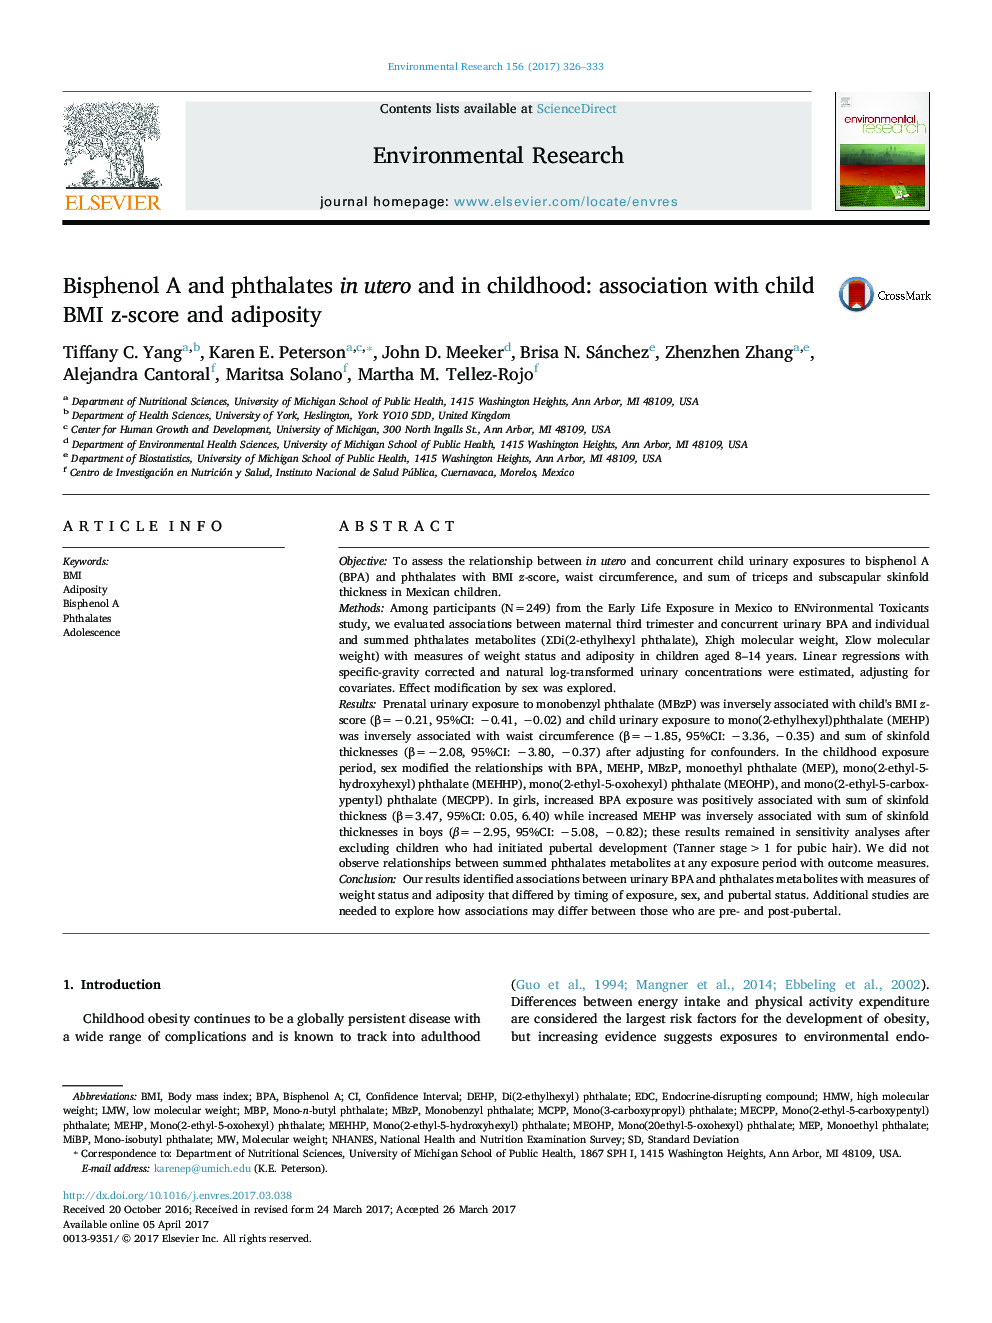 Bisphenol A and phthalates in utero and in childhood: association with child BMI z-score and adiposity